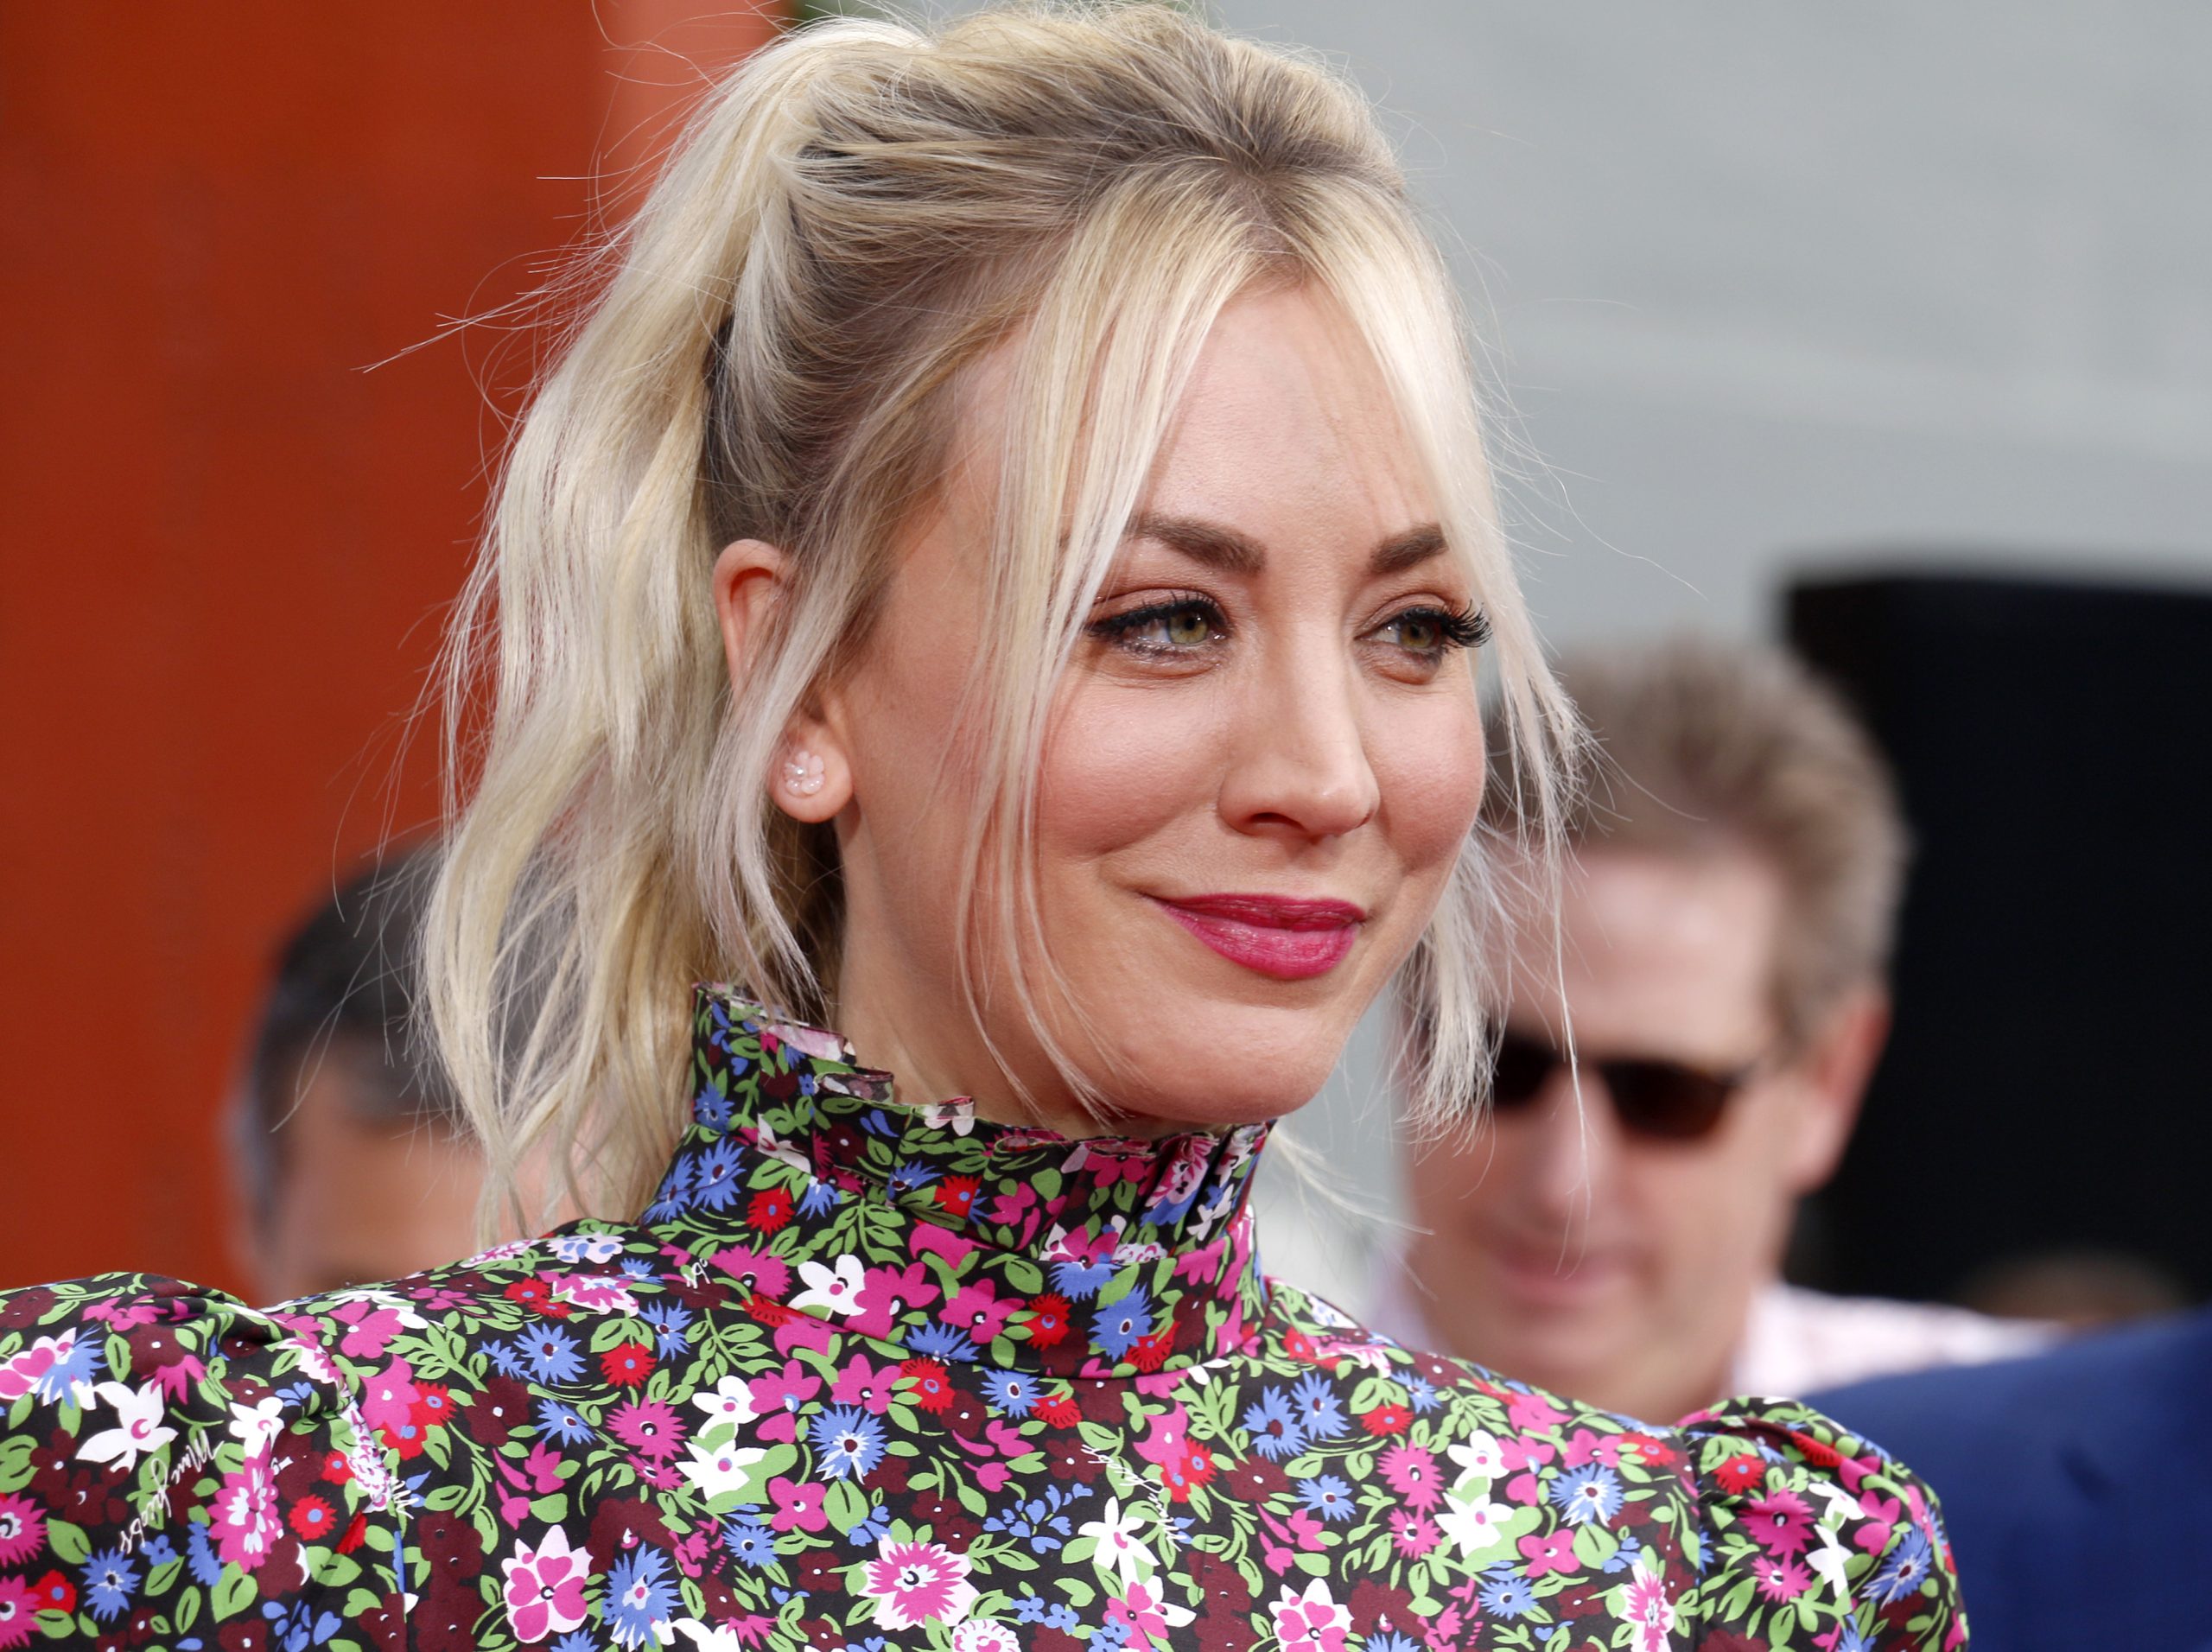 Celebrity Kaley Cuoco shows baby bump in fun photo dump, fans shower likes